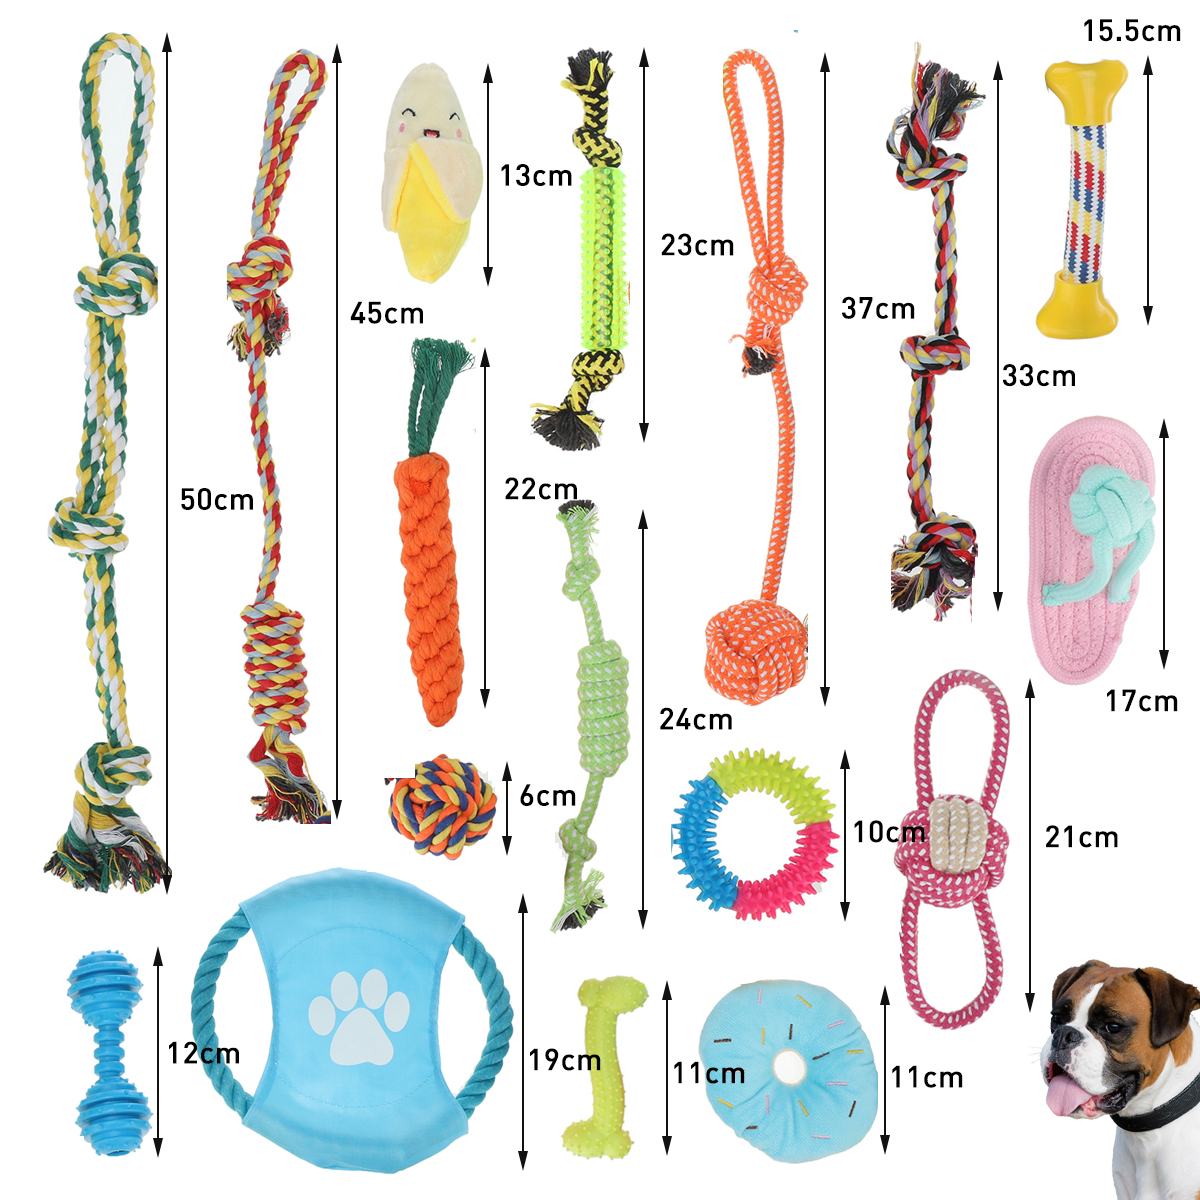 Dog-Rope-Toys-Set-1317-Pack-Dog-Chew-Toys-for-Dog-Teeth-Grinding-Cleaning-Ball-Play-IQ-Training-Inte-1917327-12